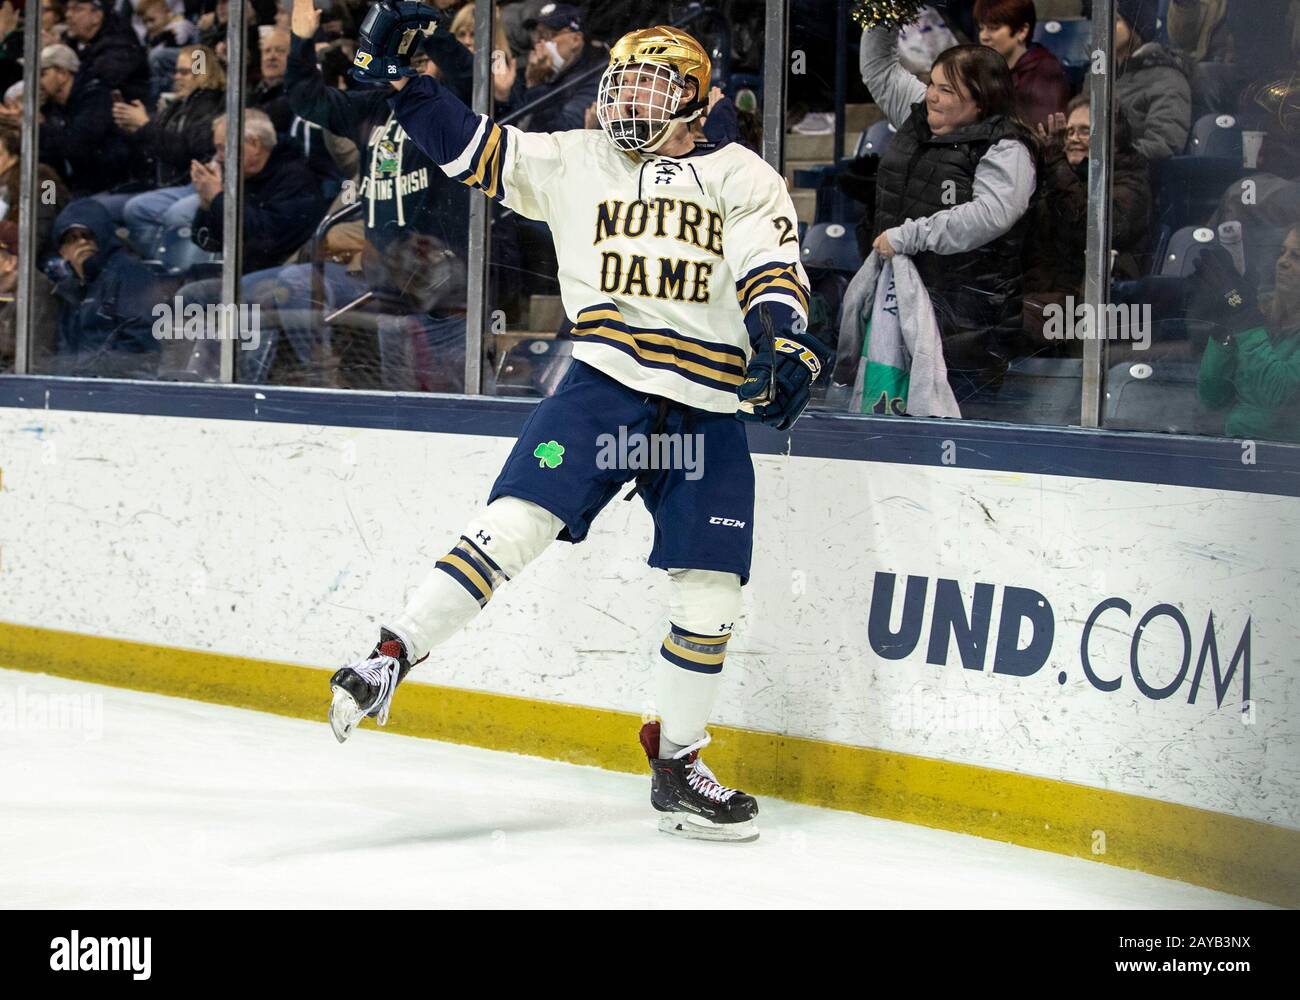 South Bend, Indiana, USA. 14th Feb, 2020. Notre Dame forward Cam Morrison  (26) celebrates goal during NCAA Hockey game action between the Minnesota  Golden Gophers and the Notre Dame Fighting Irish at